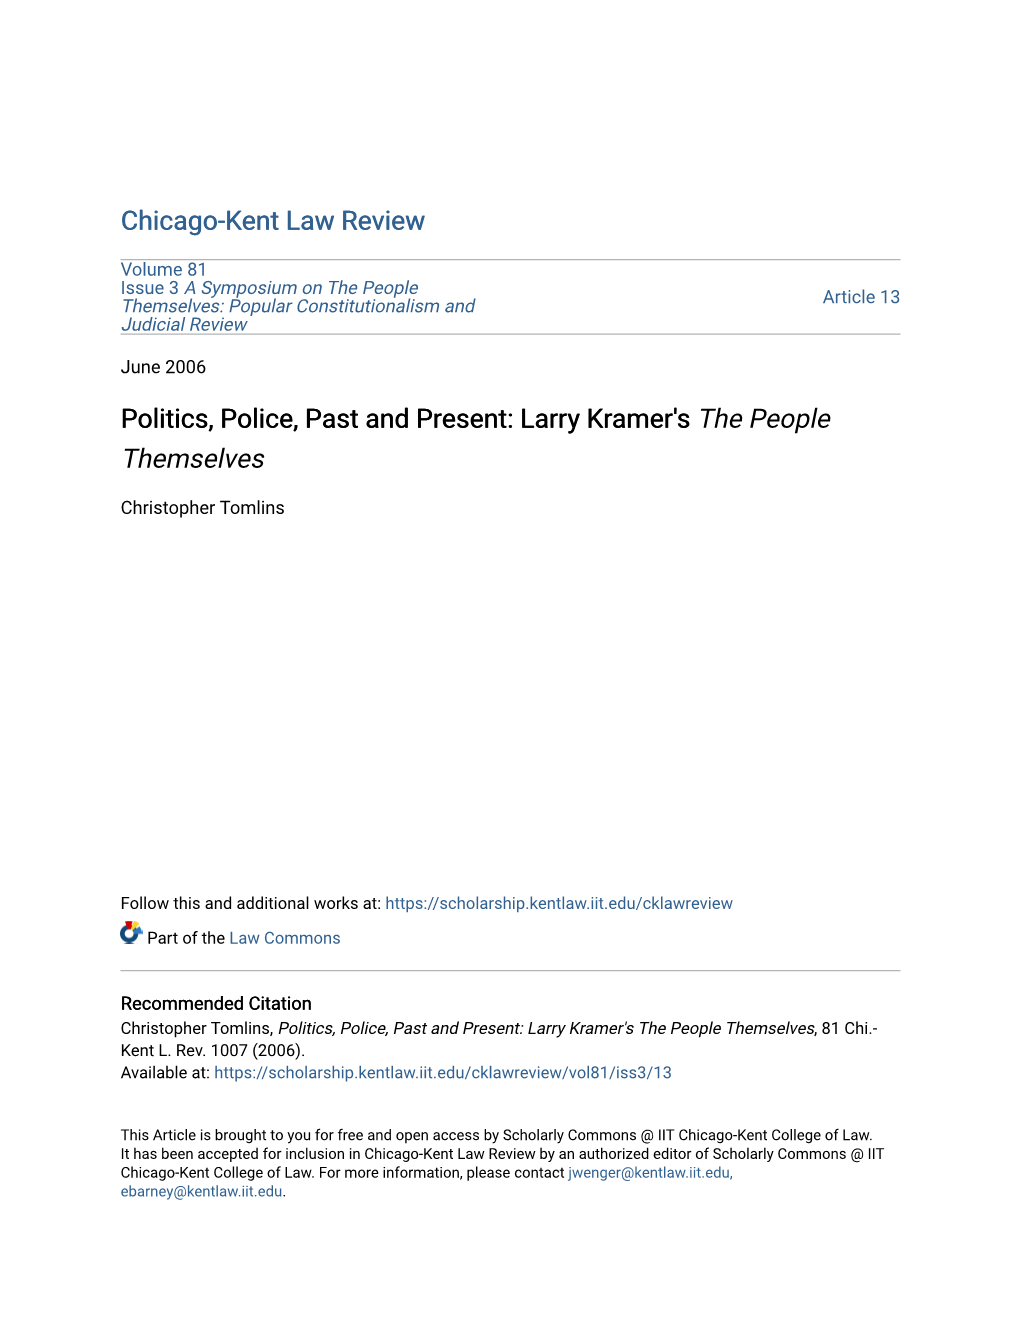 Politics, Police, Past and Present: Larry Kramer's the People Themselves